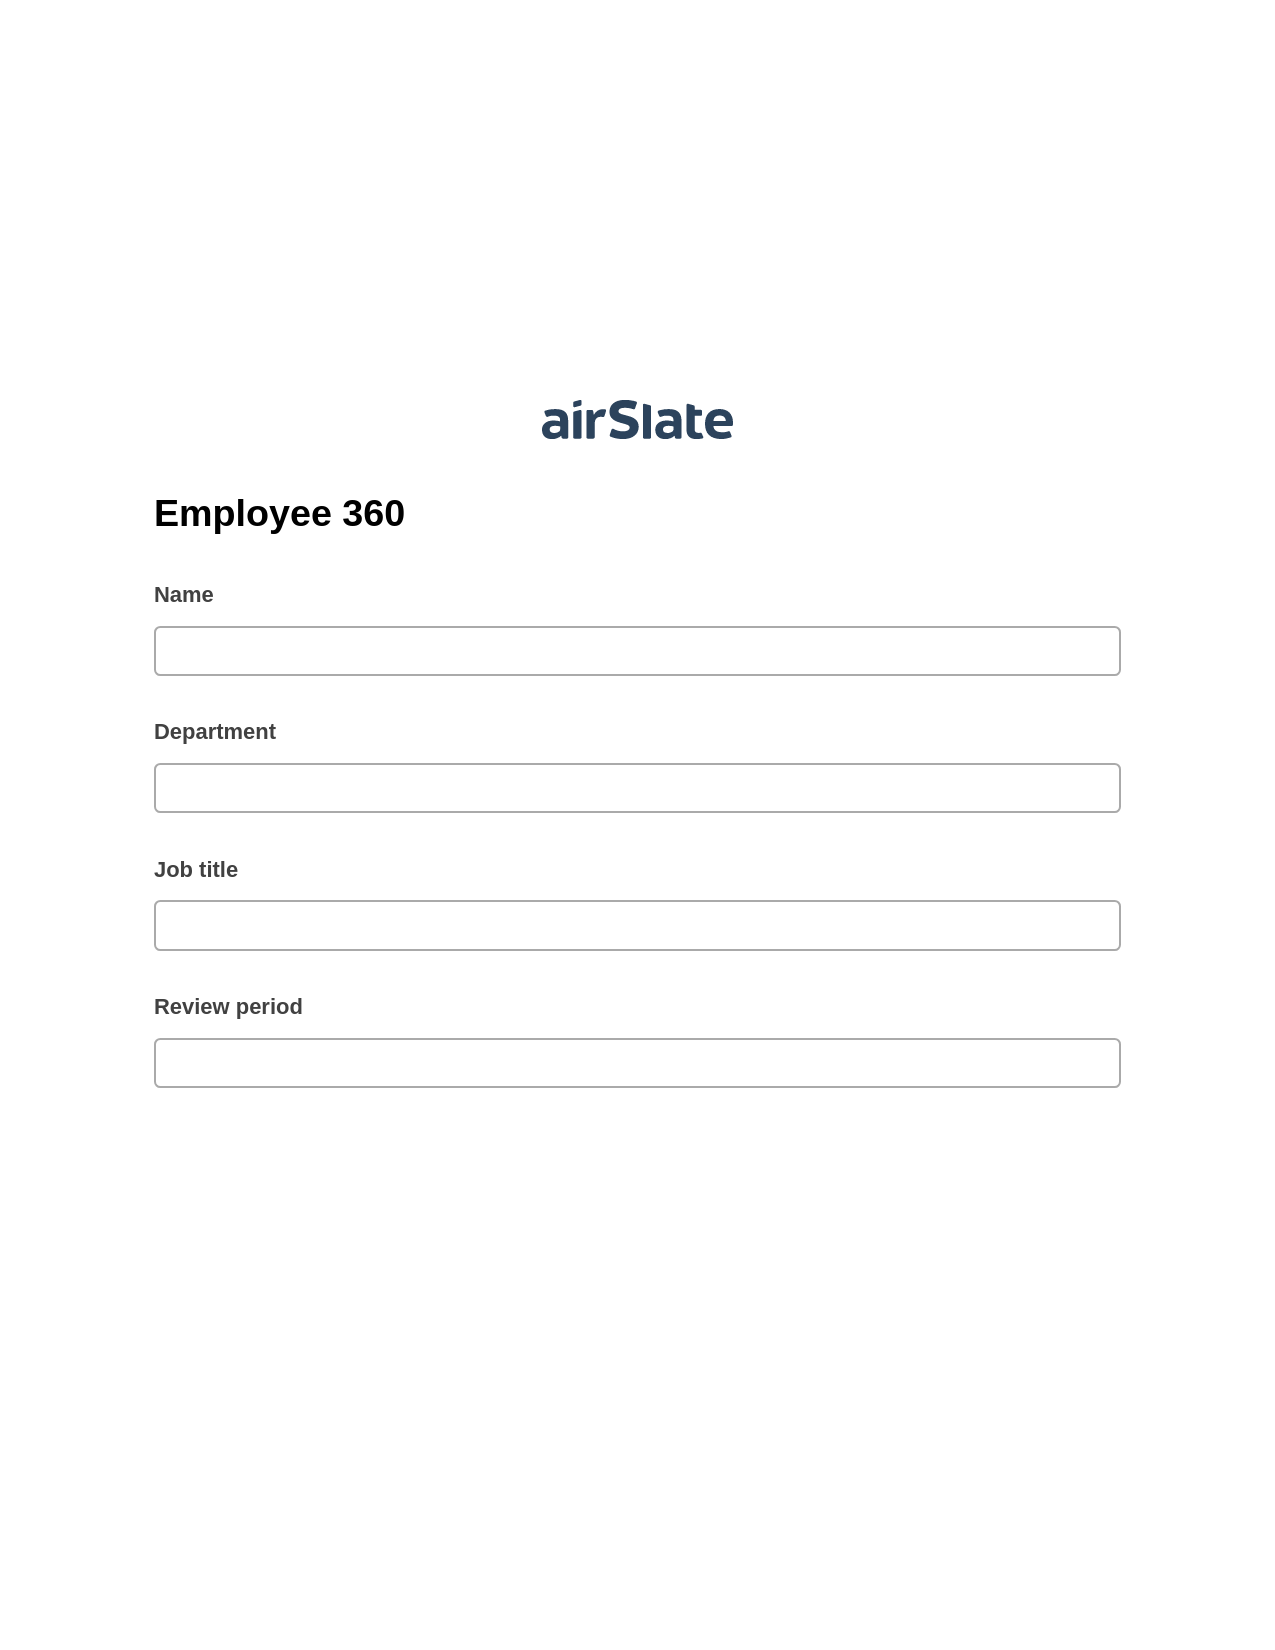 Employee 360 Pre-fill from Salesforce Records Bot, Export to MS Dynamics 365 Bot, Export to Excel 365 Bot